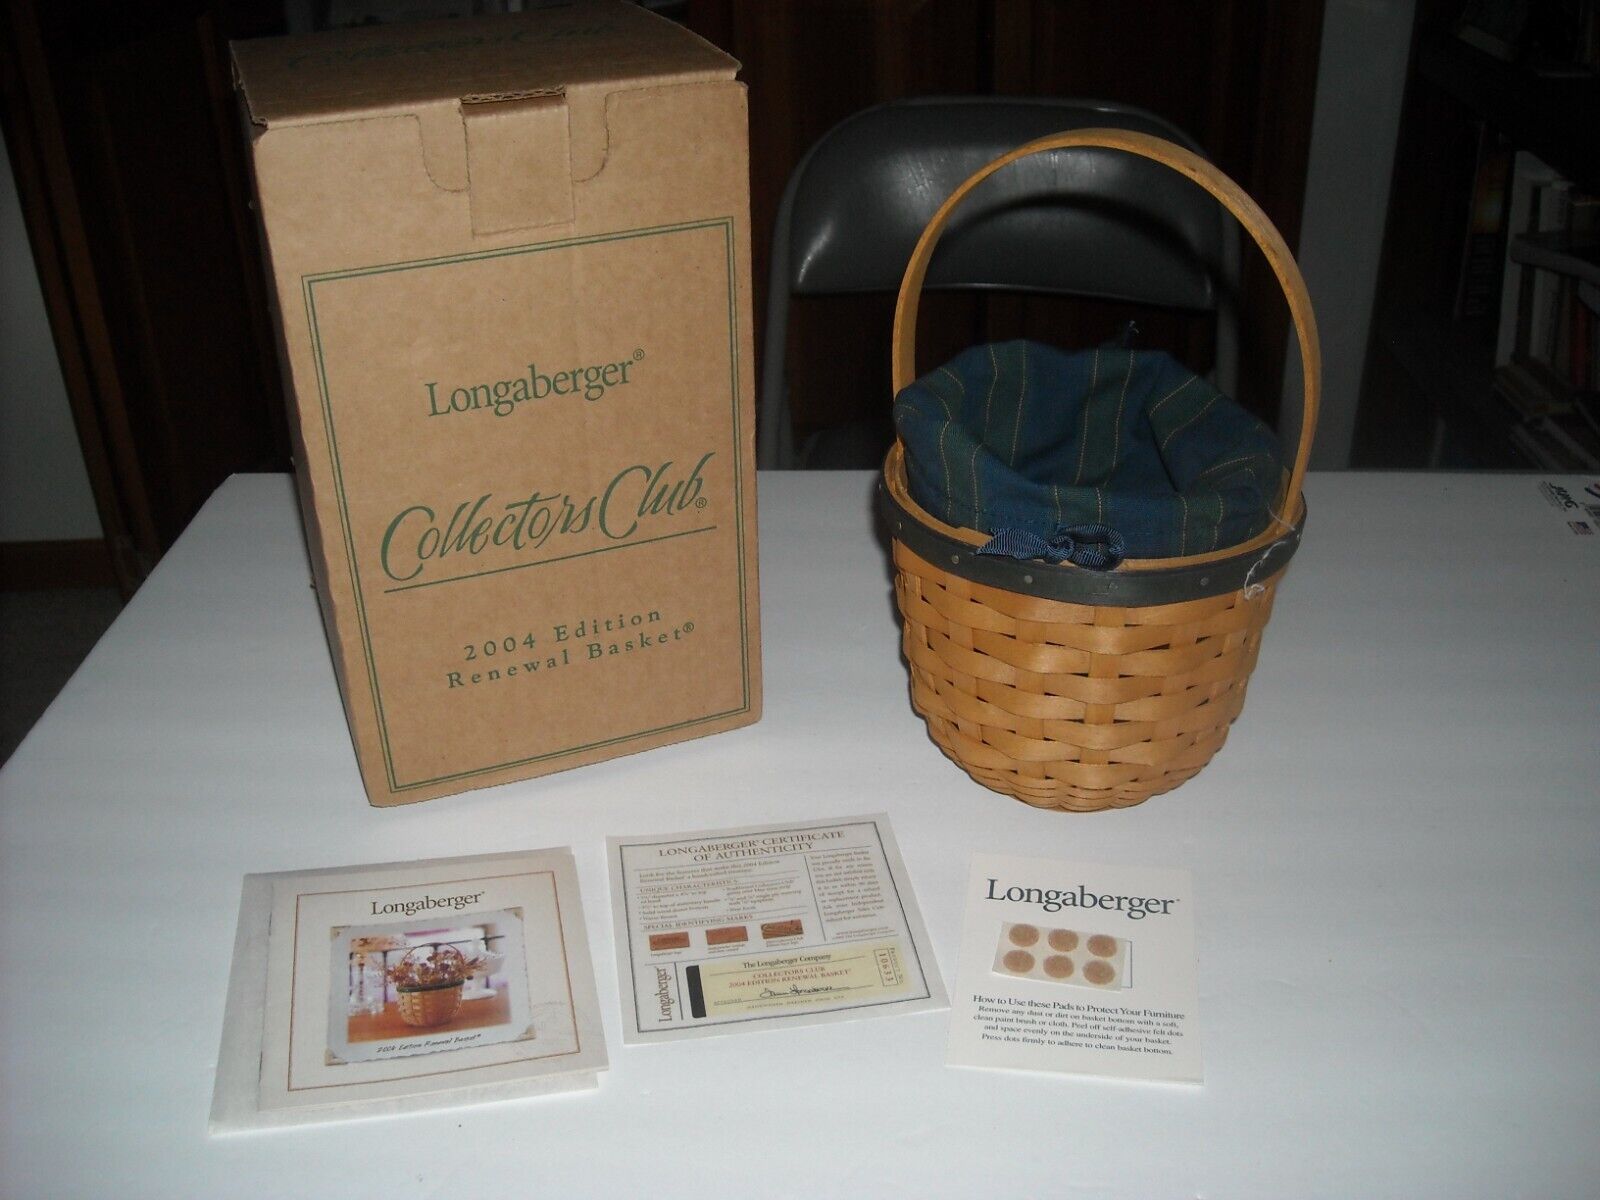 New Longaberger Collectors Club 2004 Edition Renewal Basket With Protector Liner